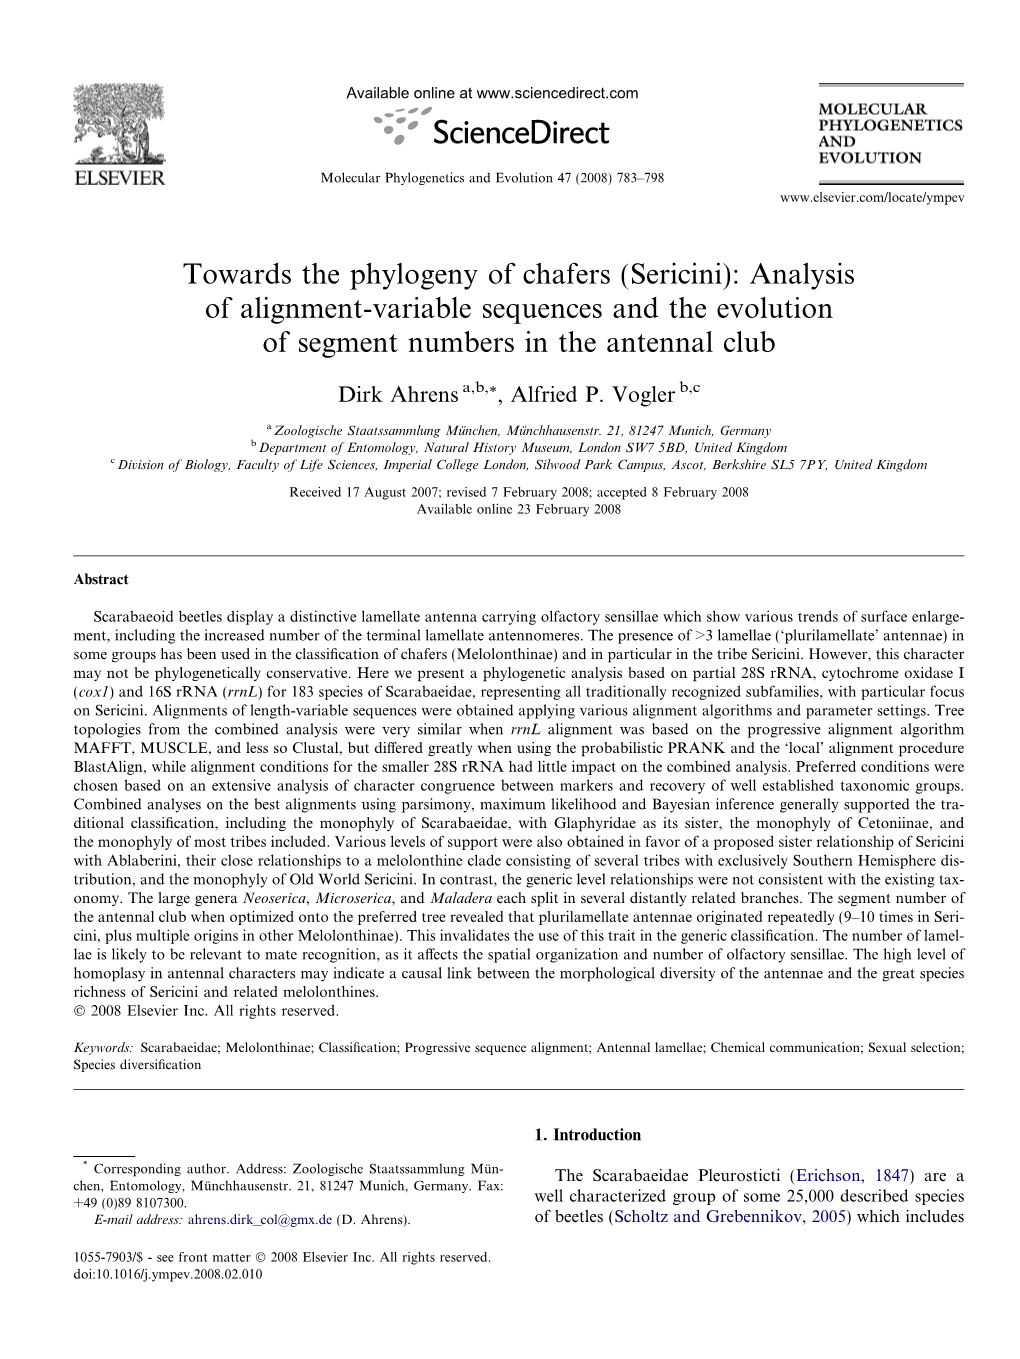 Towards the Phylogeny of Chafers (Sericini): Analysis of Alignment-Variable Sequences and the Evolution of Segment Numbers in the Antennal Club